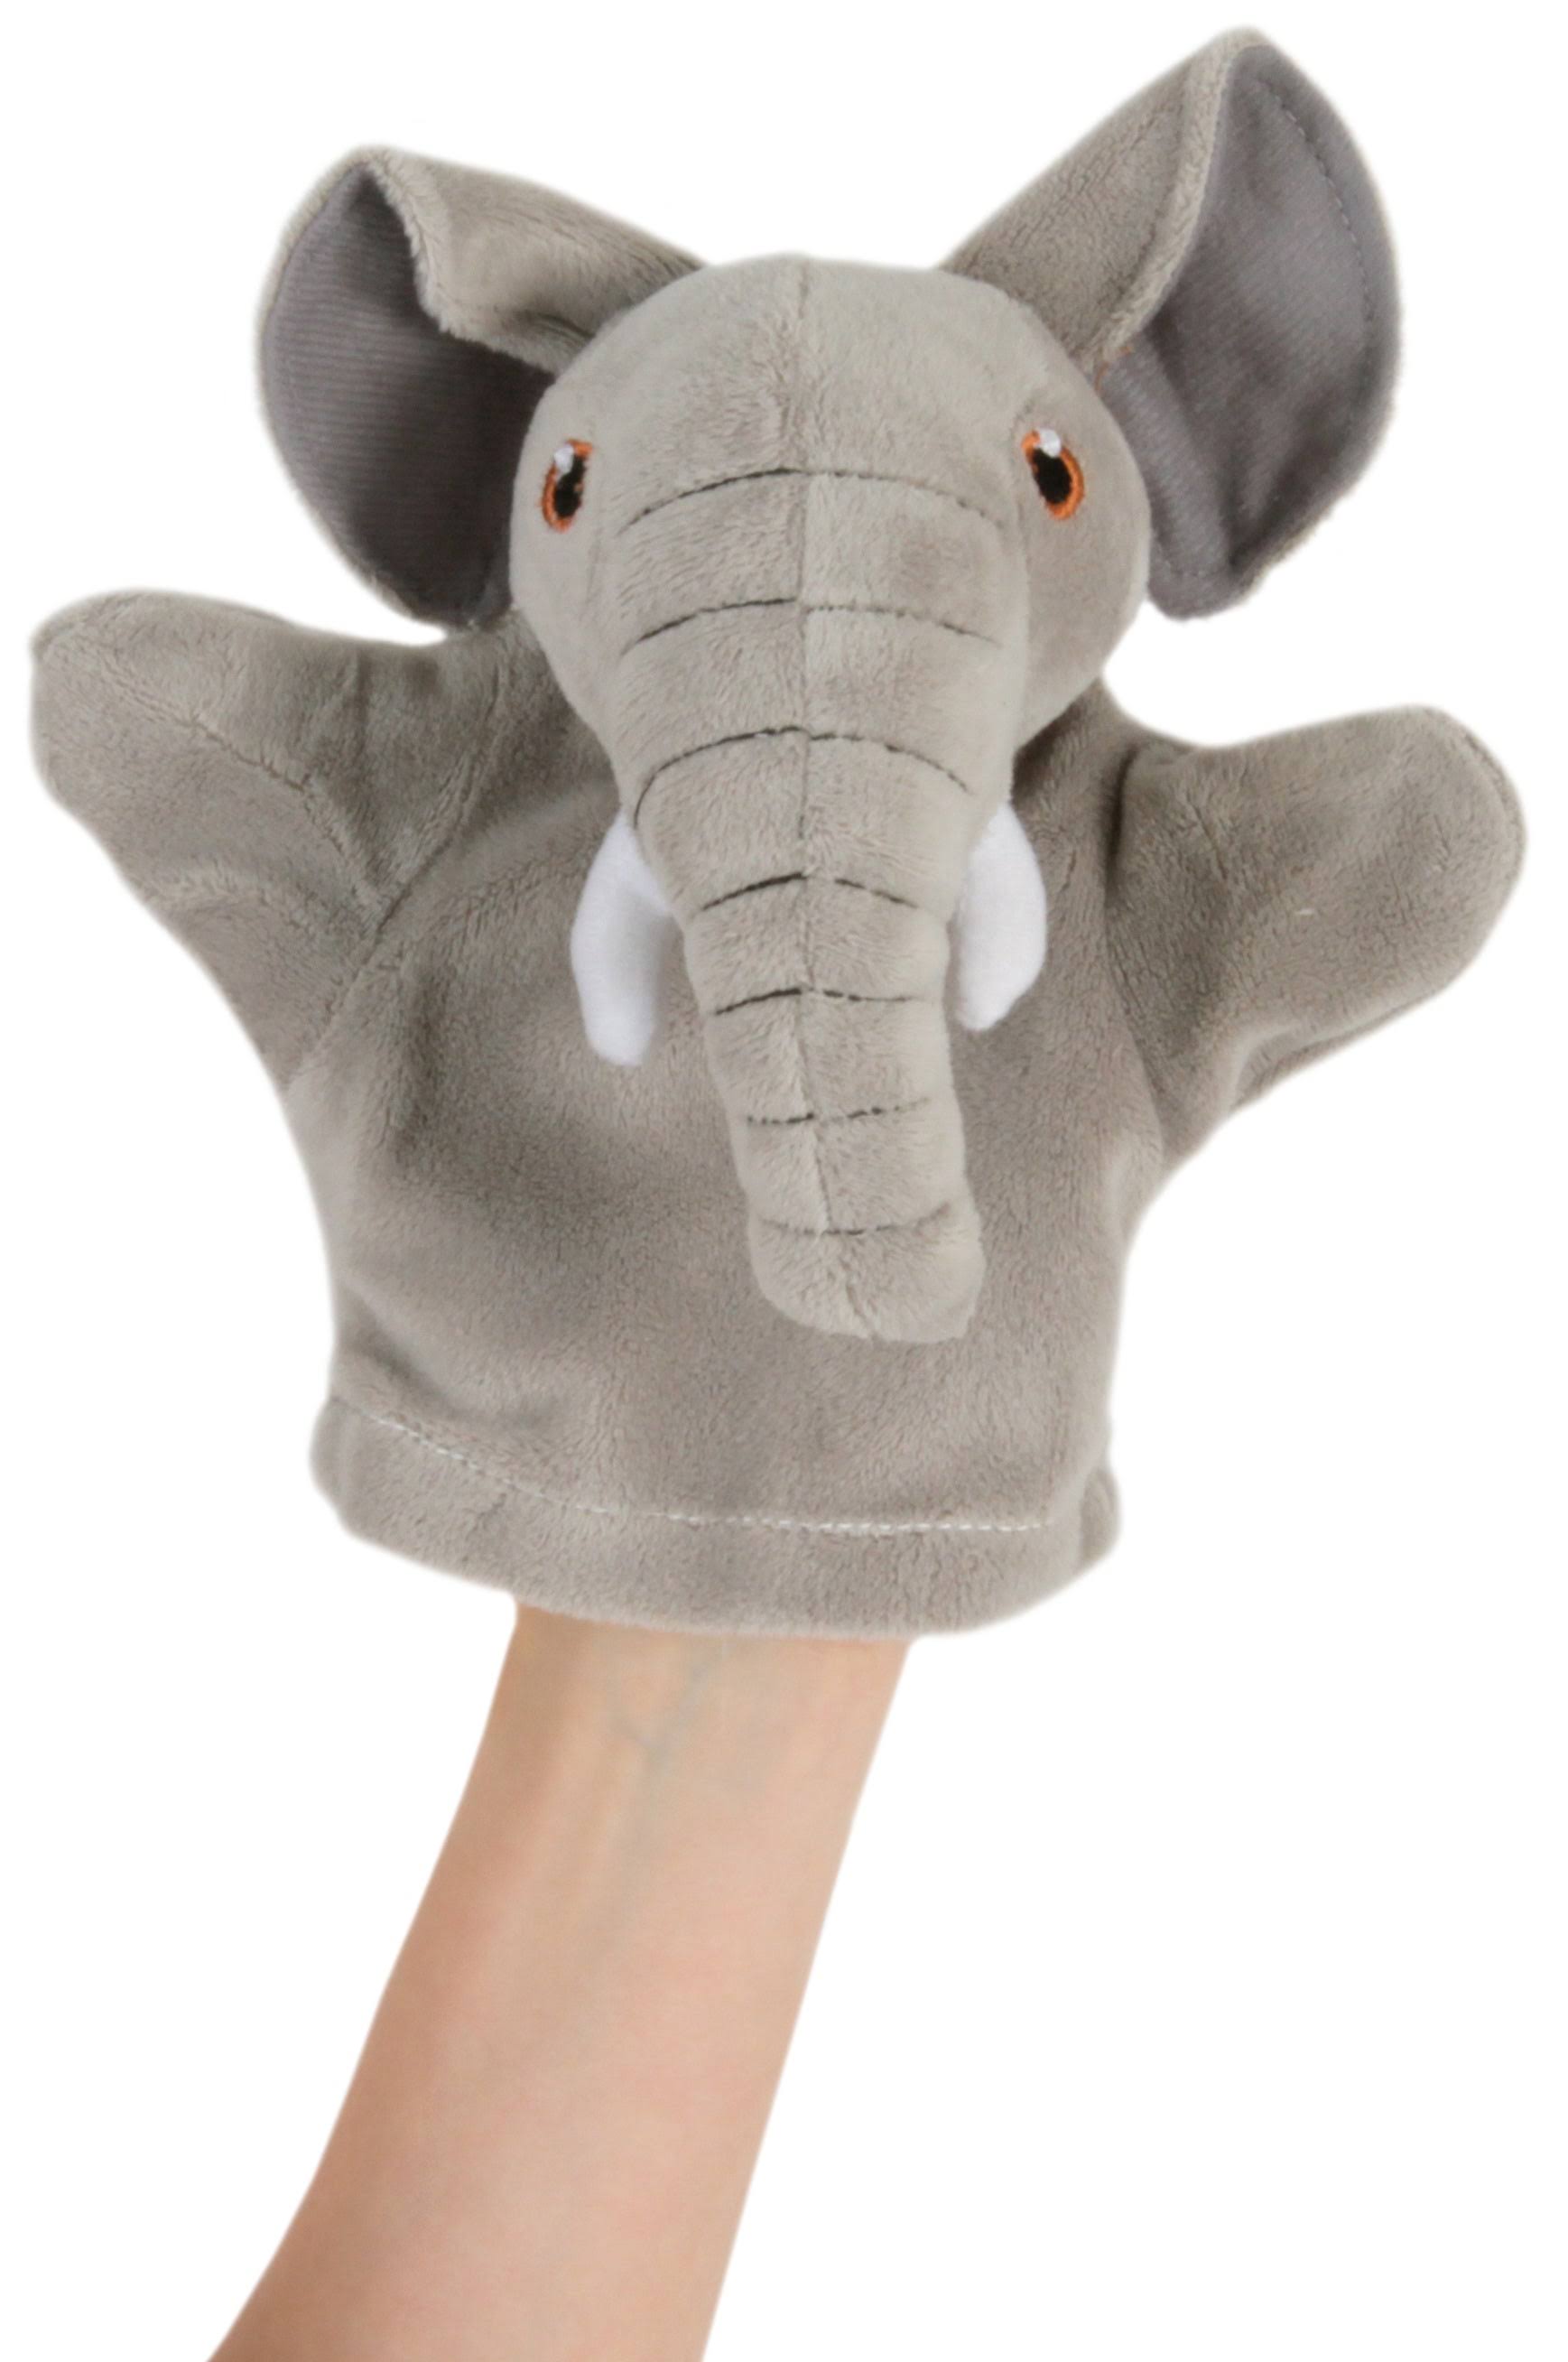 The Puppet Company - My First Elephant Puppet